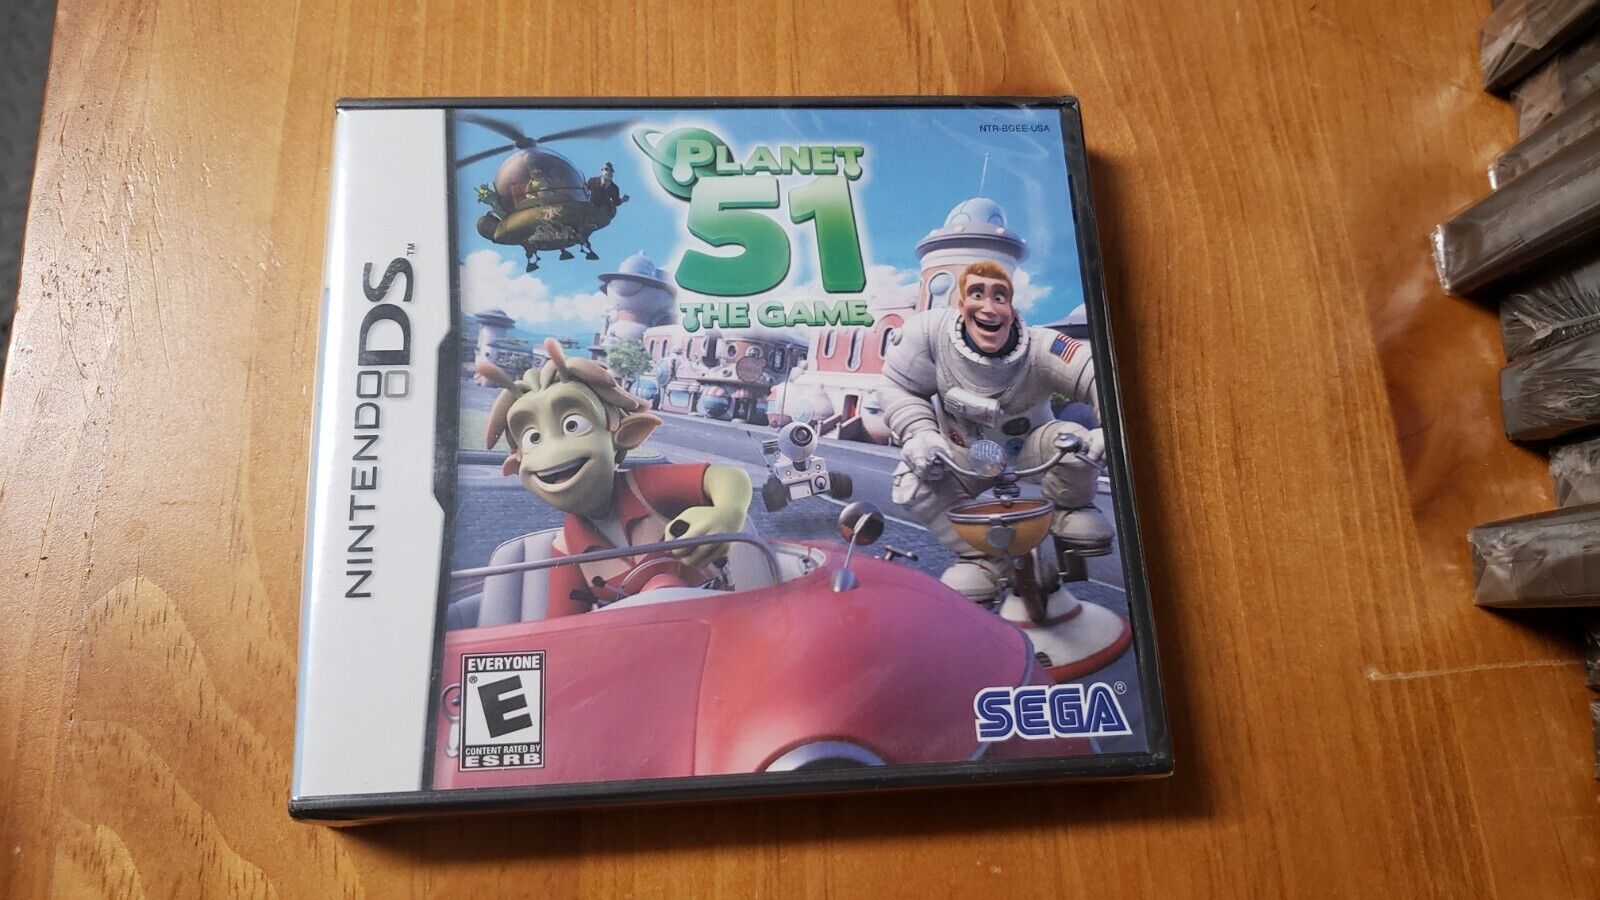 Planet 51: The Game (Nintendo DS, 2009)